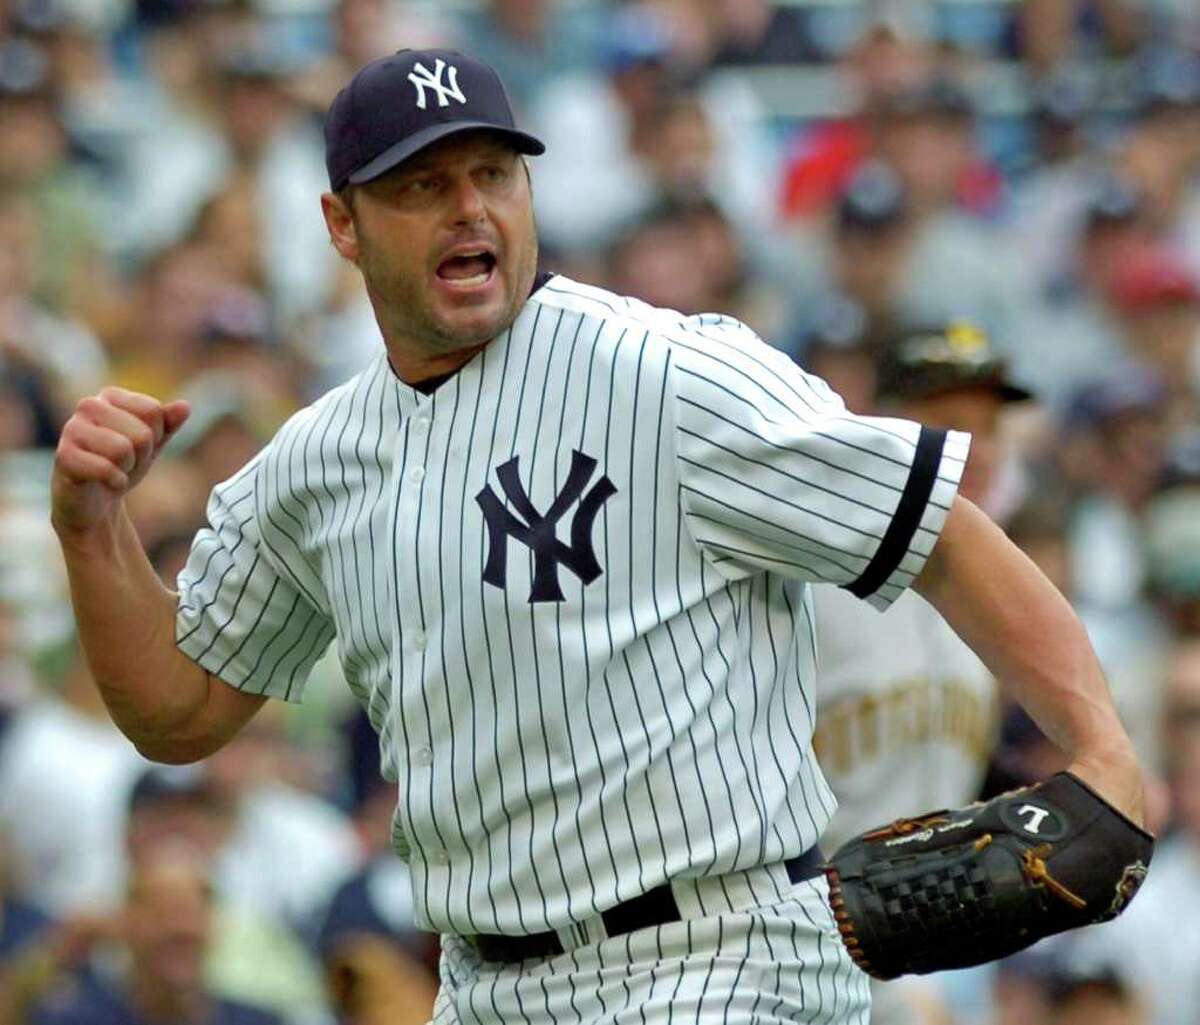 Roger Clemens charged with perjury in steroid case